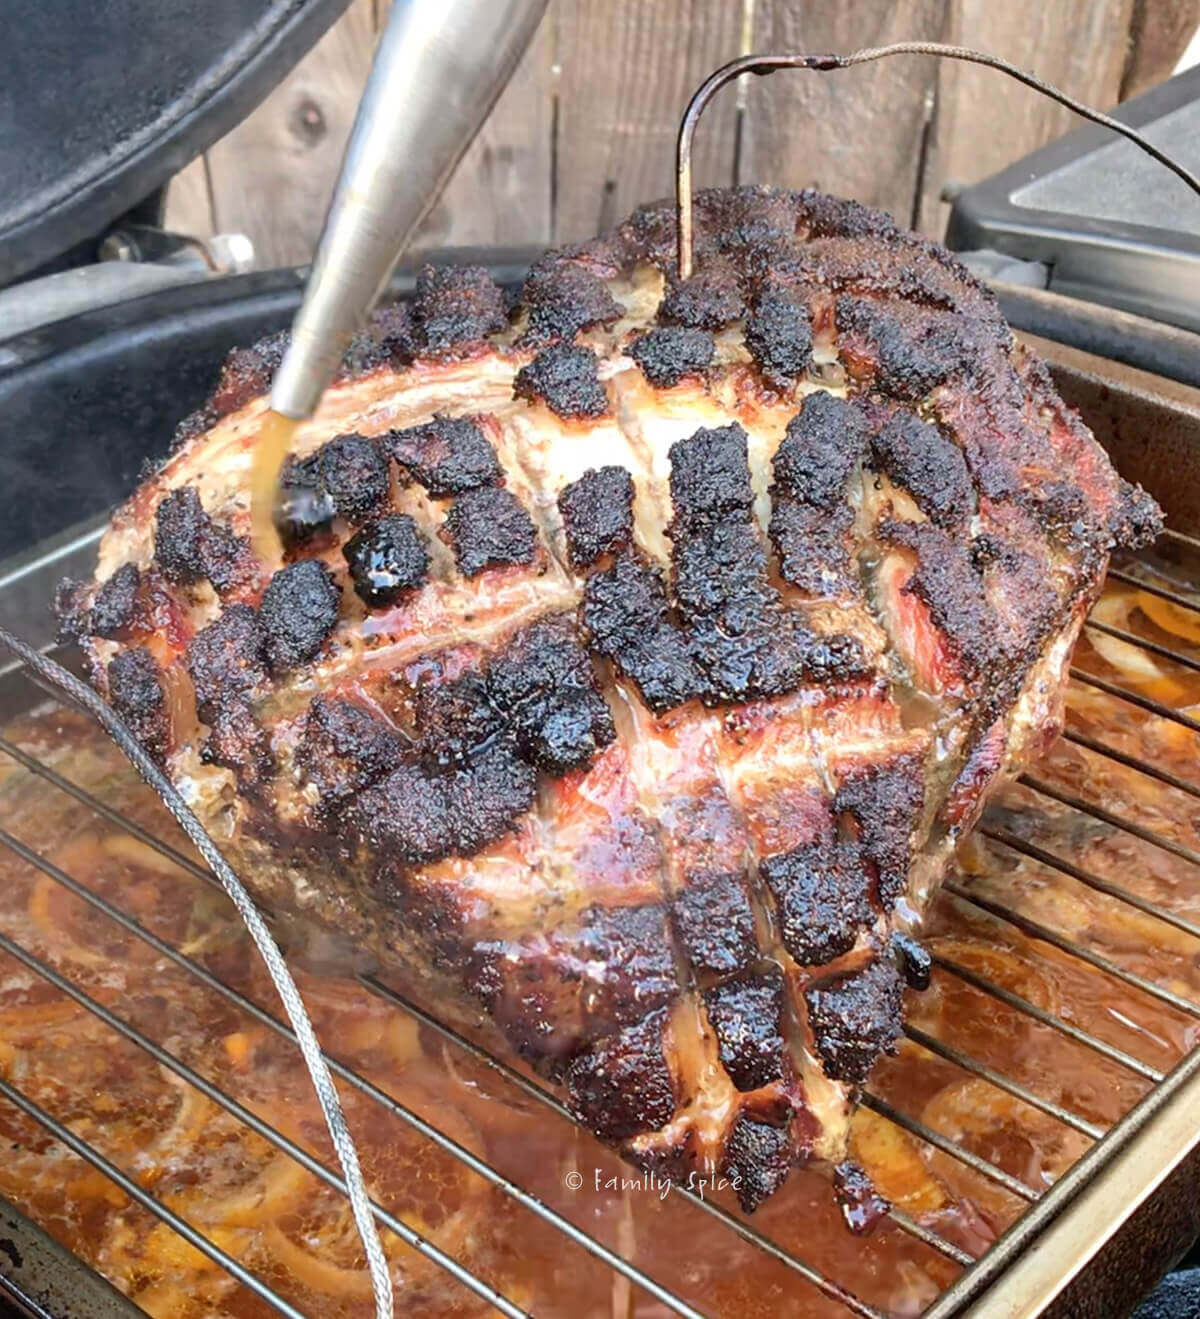 Basting a smoked pork butt in a kamado grill